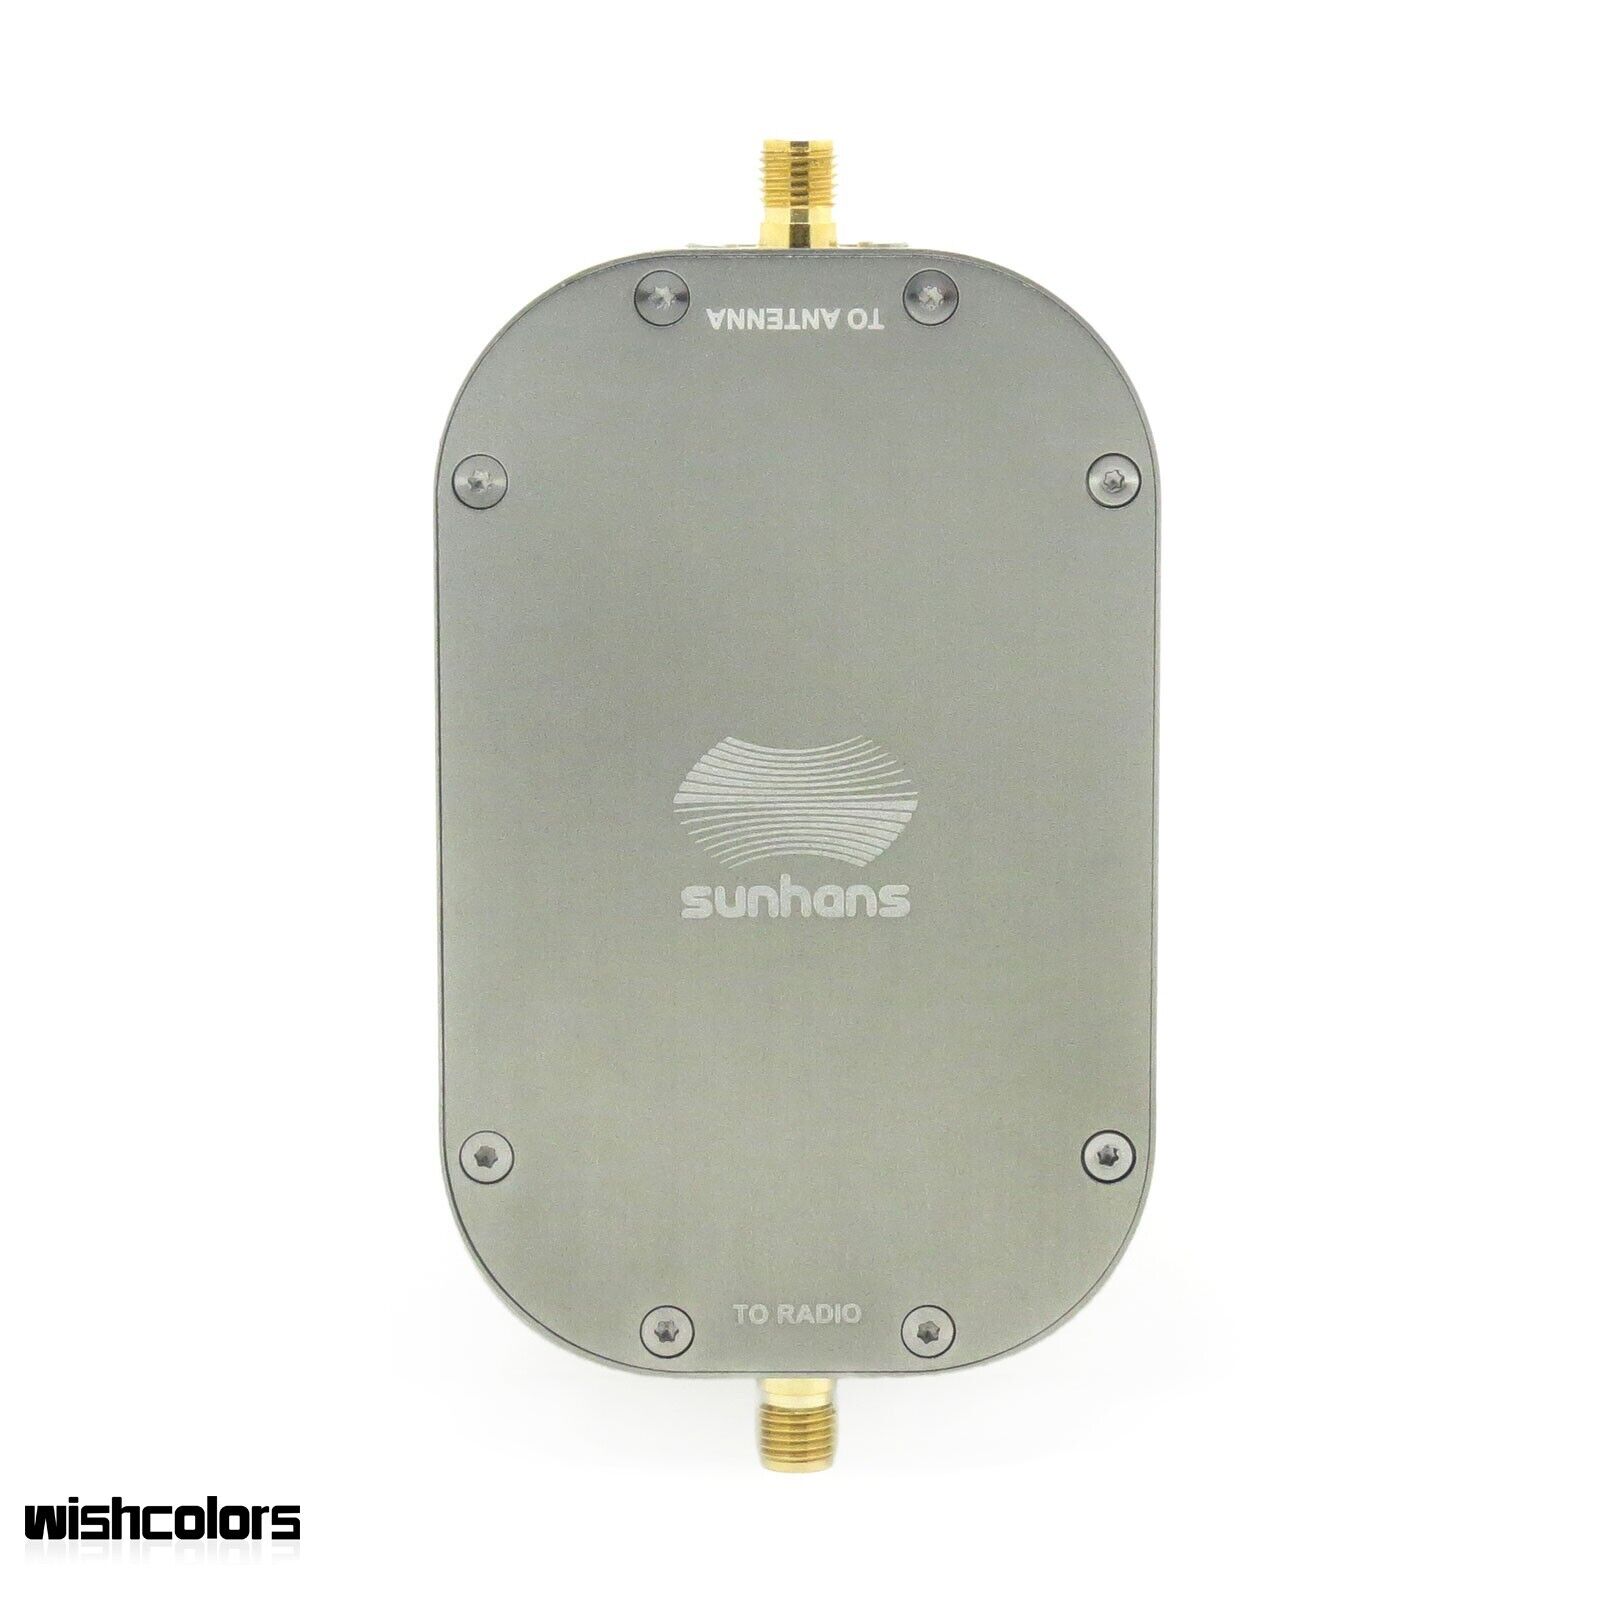 2.4GHz 5.8GHz Wifi Signal Booster Signal Amplifier for Model aeroplanes Drones